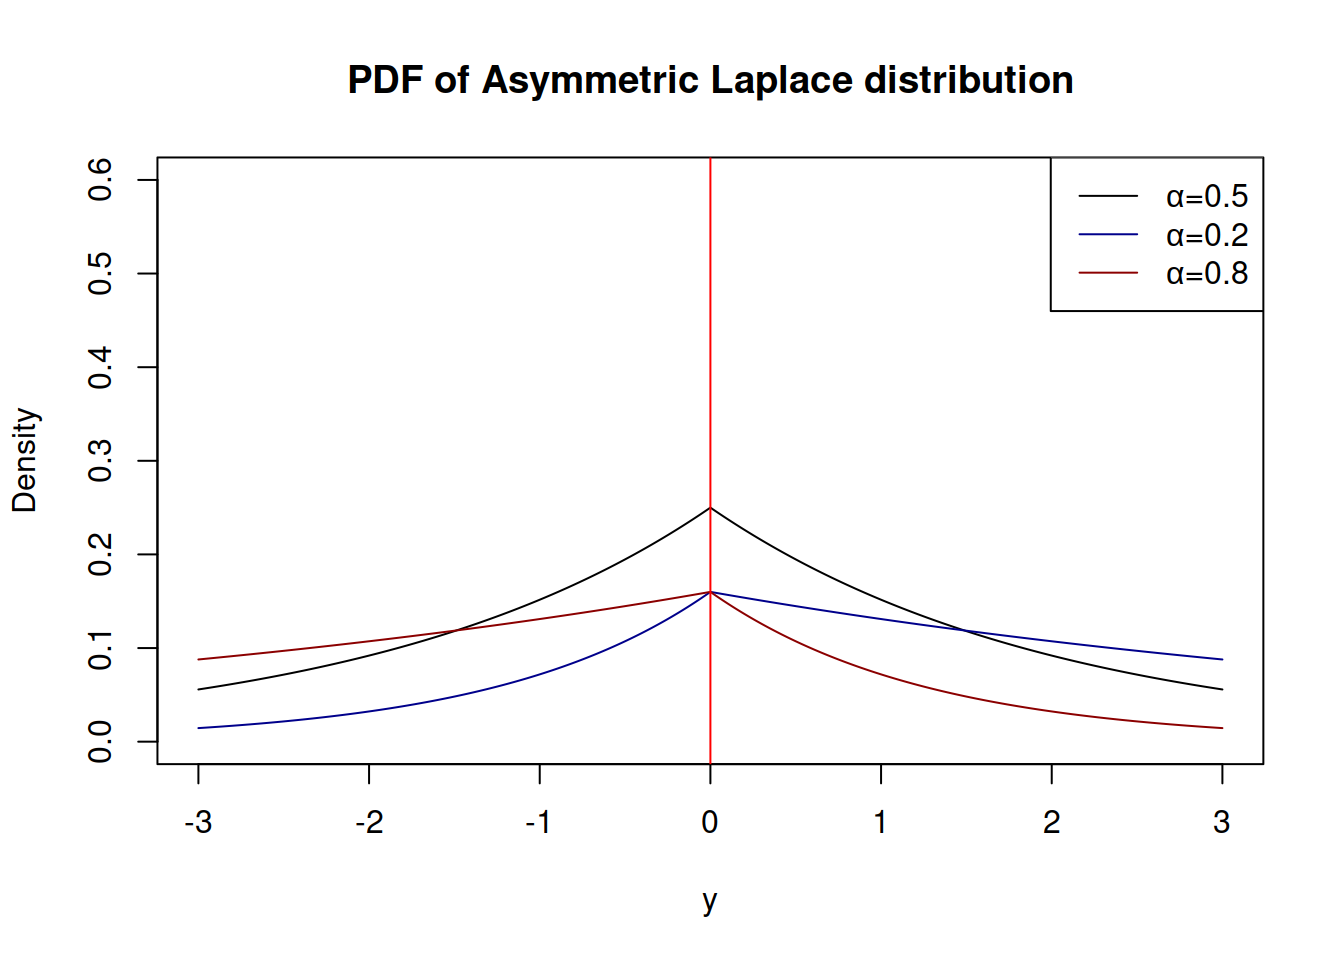 Probability Density Functions of Asymmetric Laplace distribution